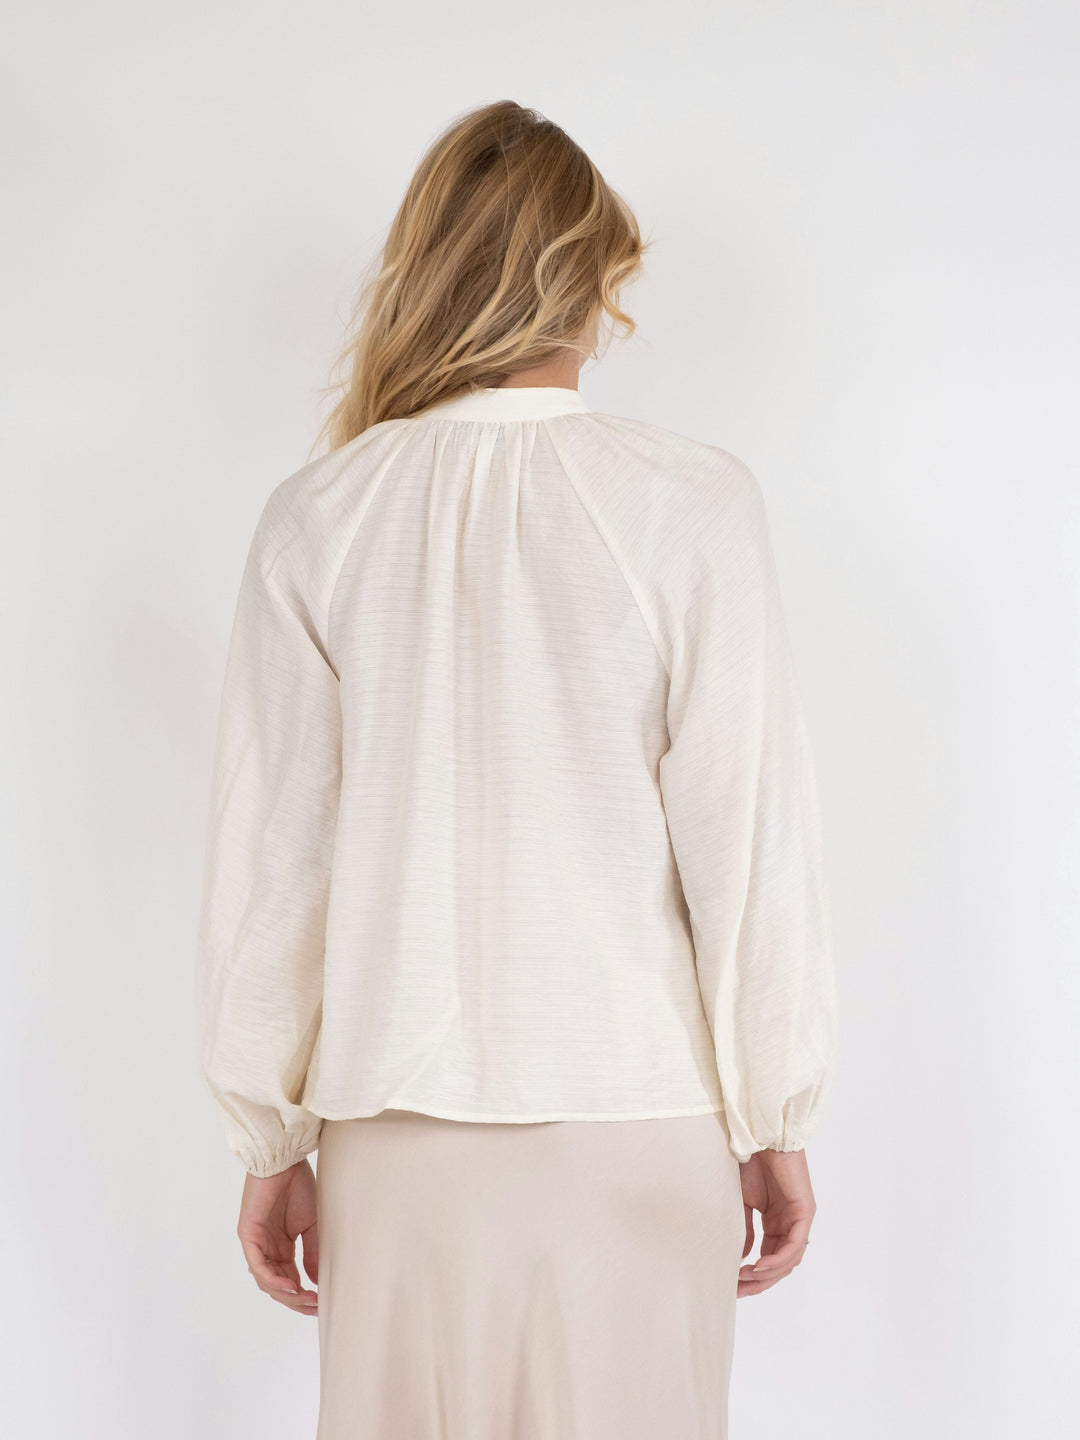 Neo Noir - Camille Solid Blouse - Off White